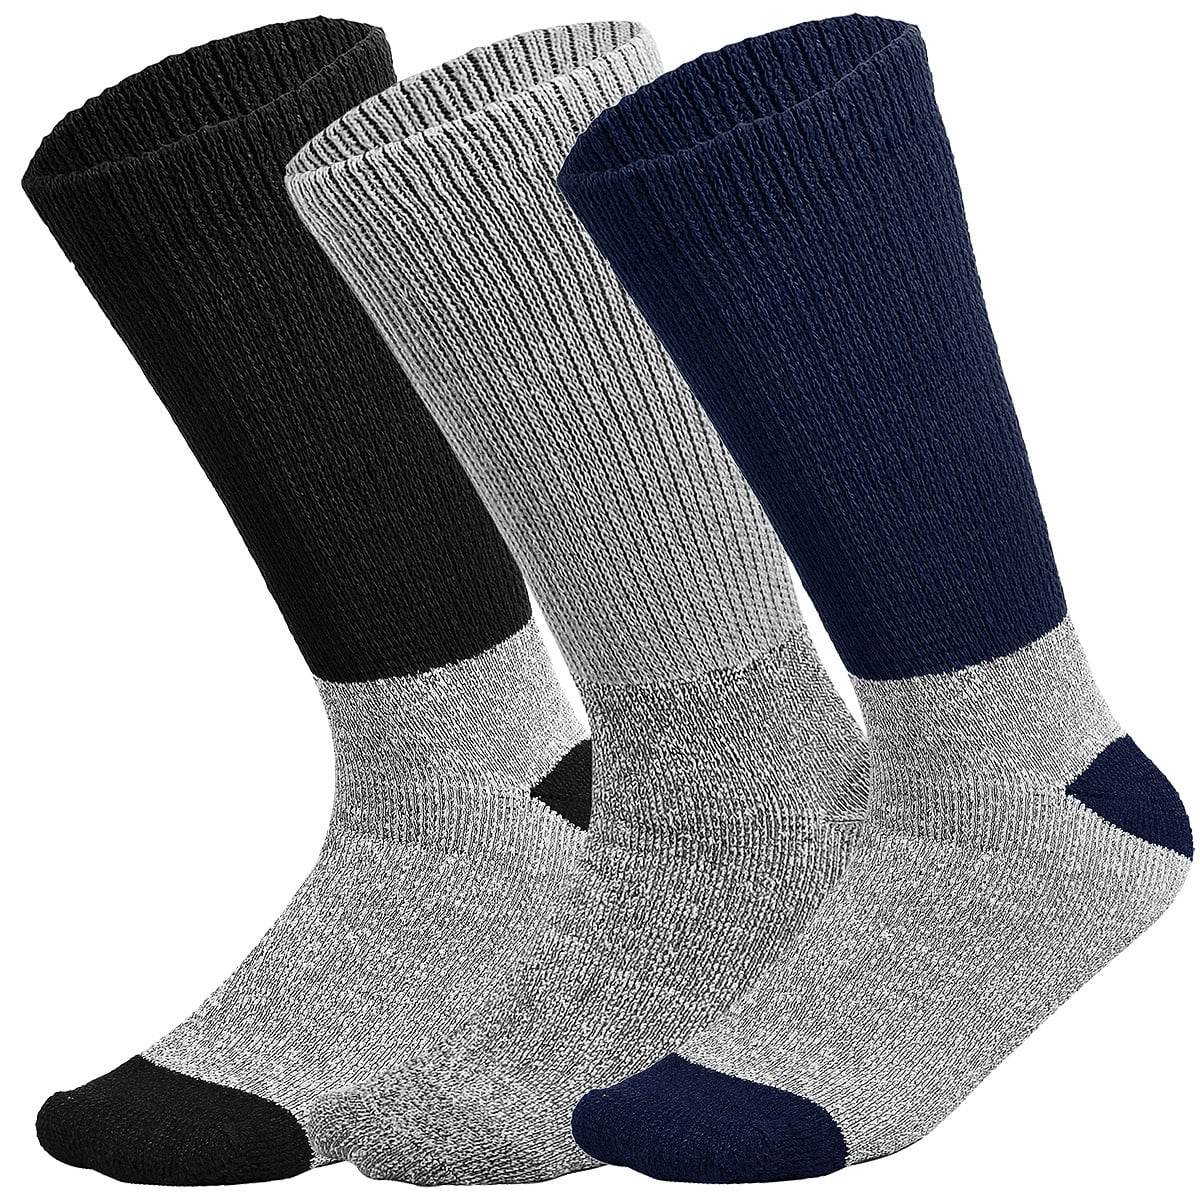 Heated Thermal Socks Winter Foot Warmers For Men Large Size 13-15 